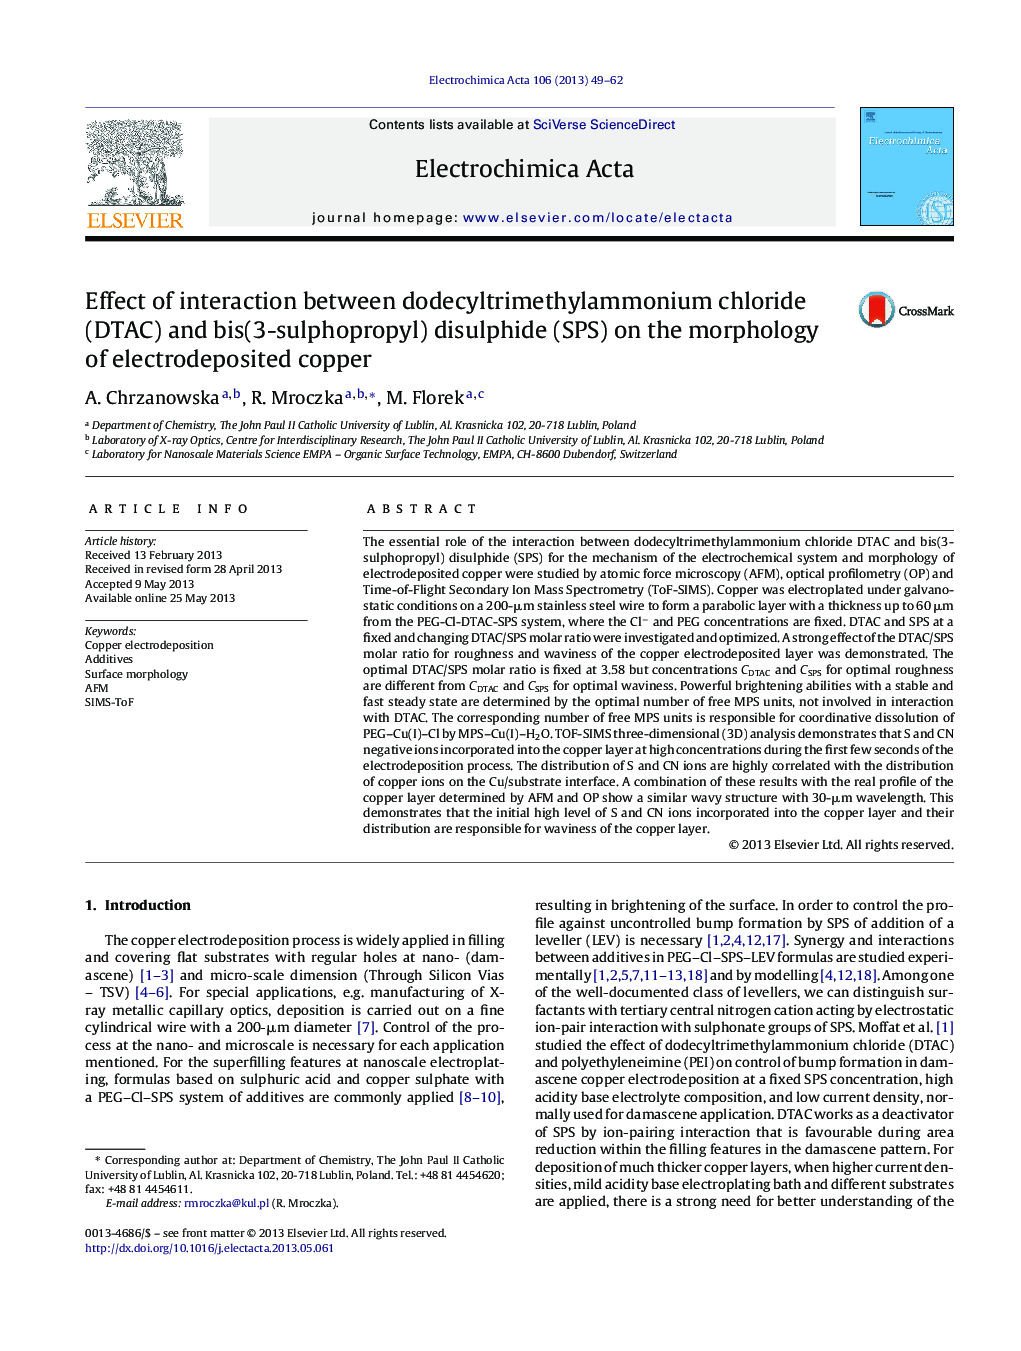 Effect of interaction between dodecyltrimethylammonium chloride (DTAC) and bis(3-sulphopropyl) disulphide (SPS) on the morphology of electrodeposited copper